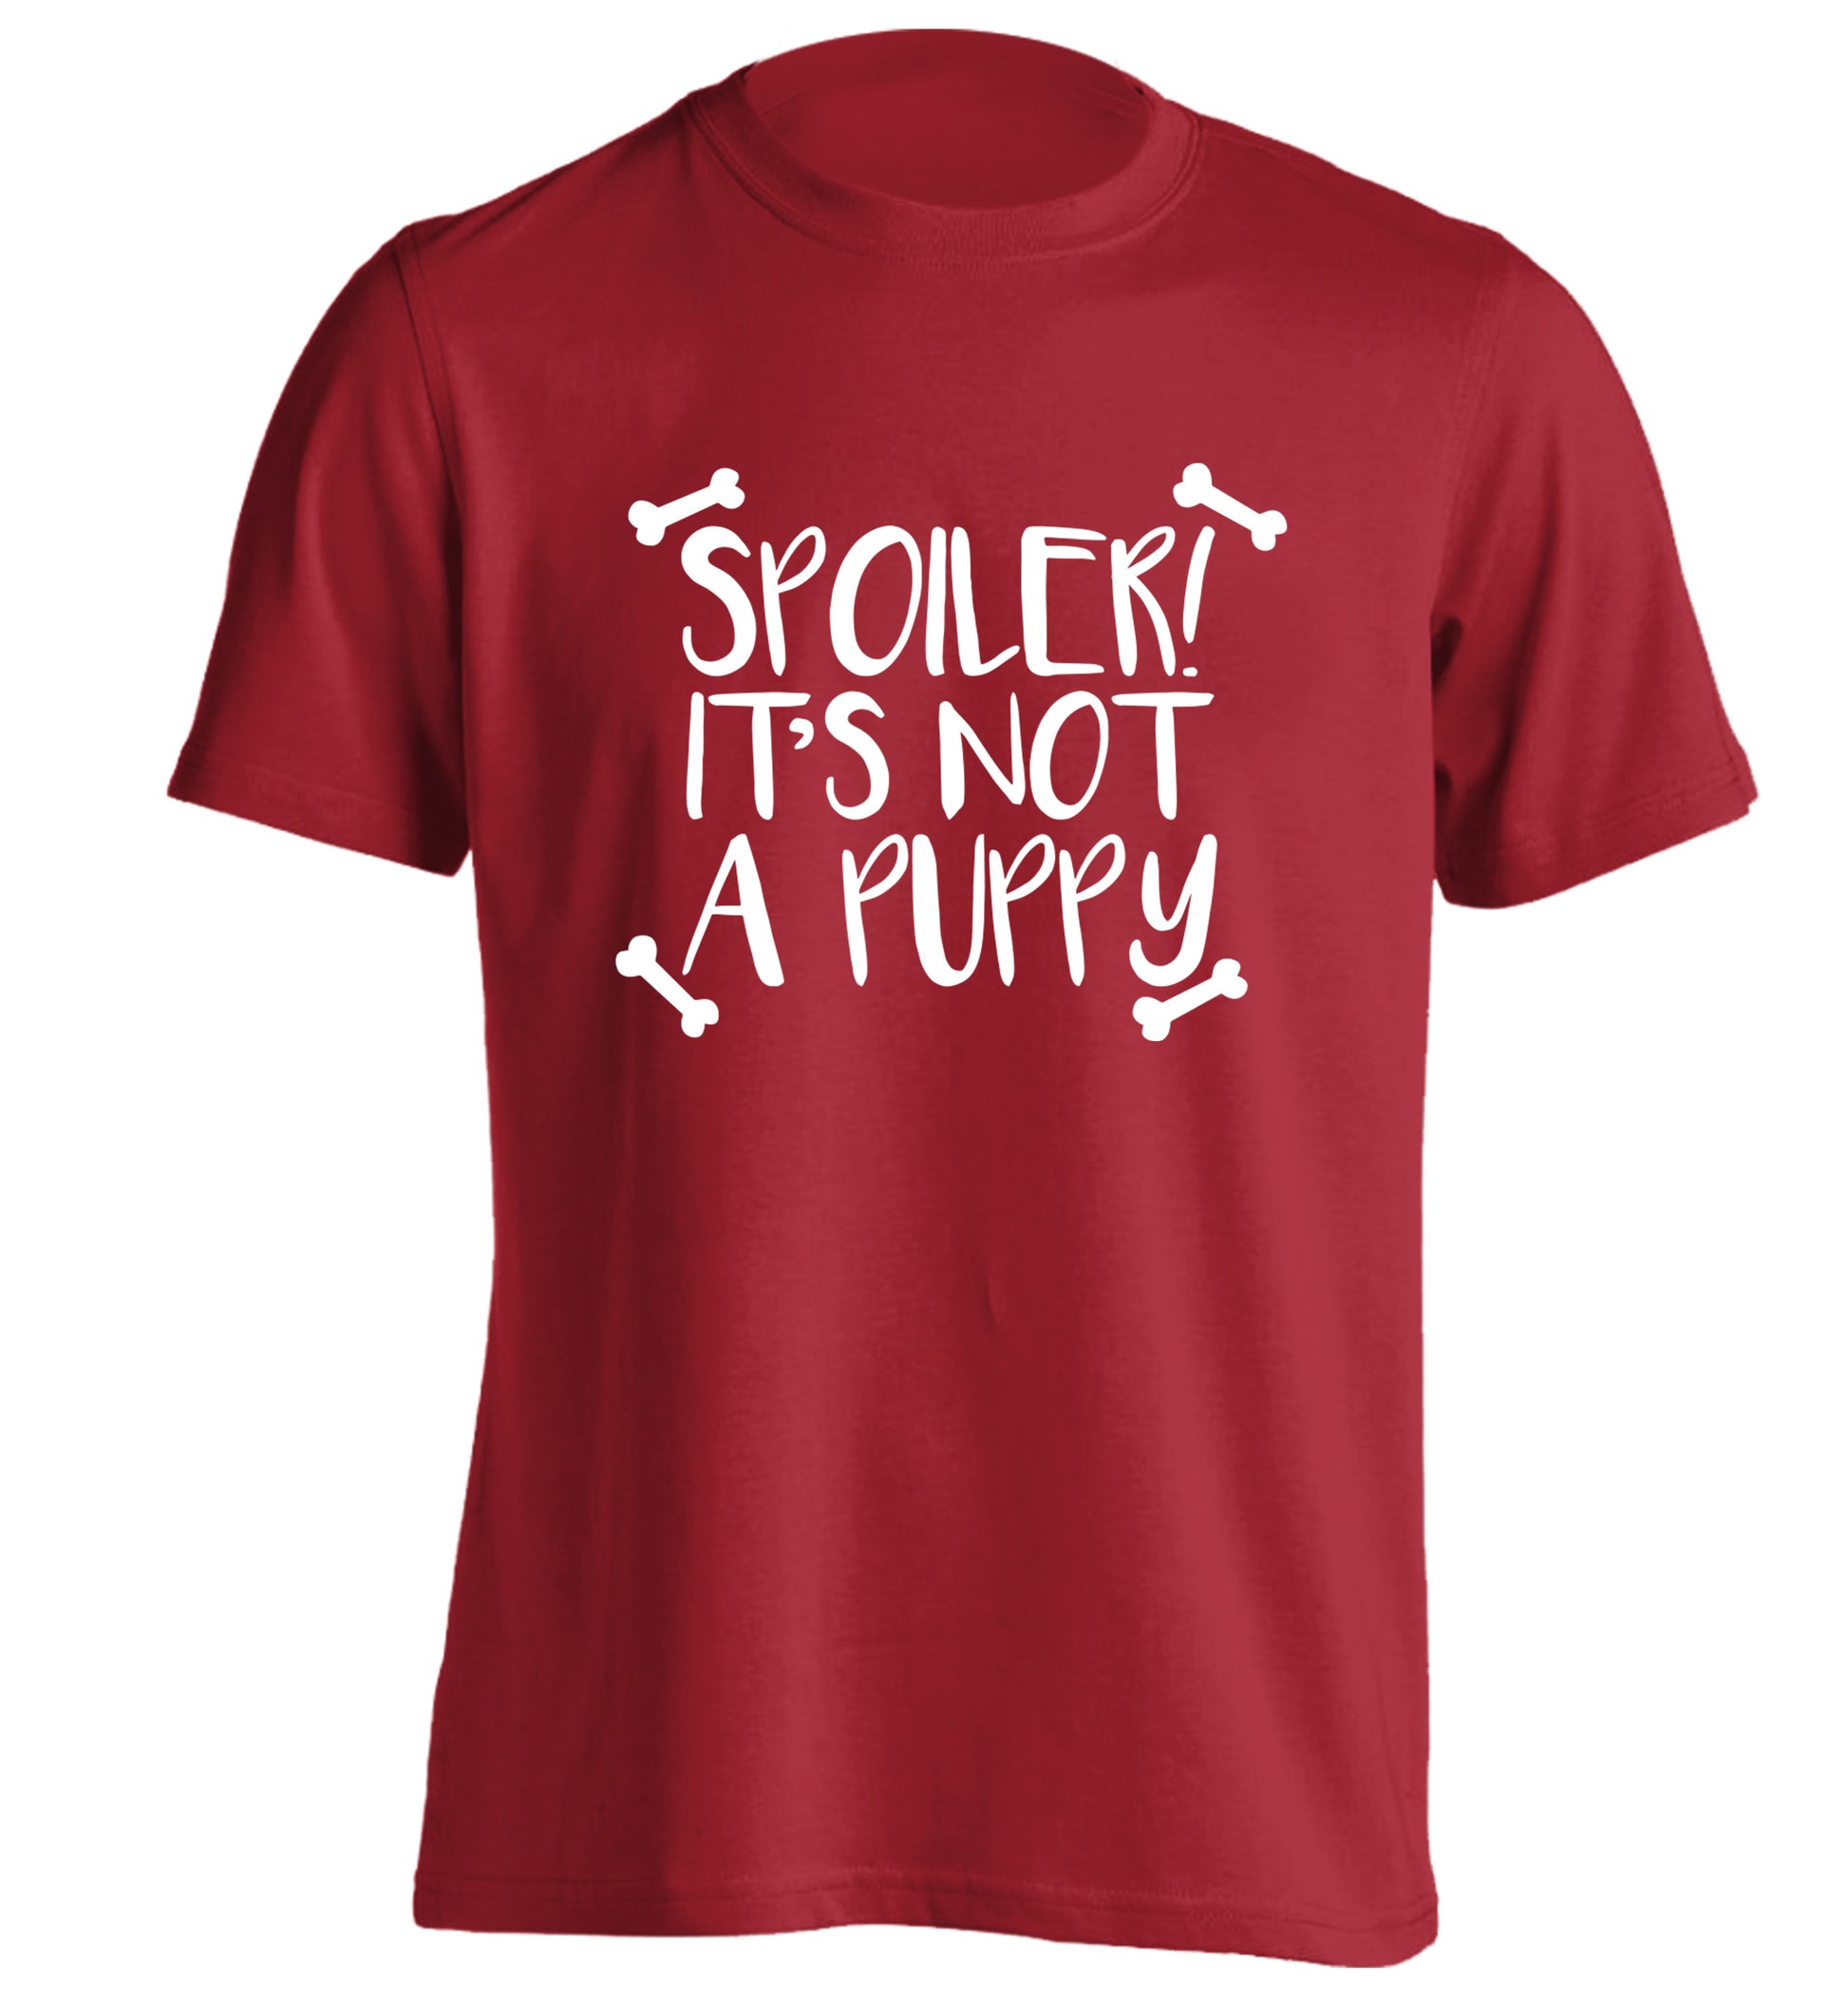 Spoiler it's not a puppy adults unisex red Tshirt 2XL